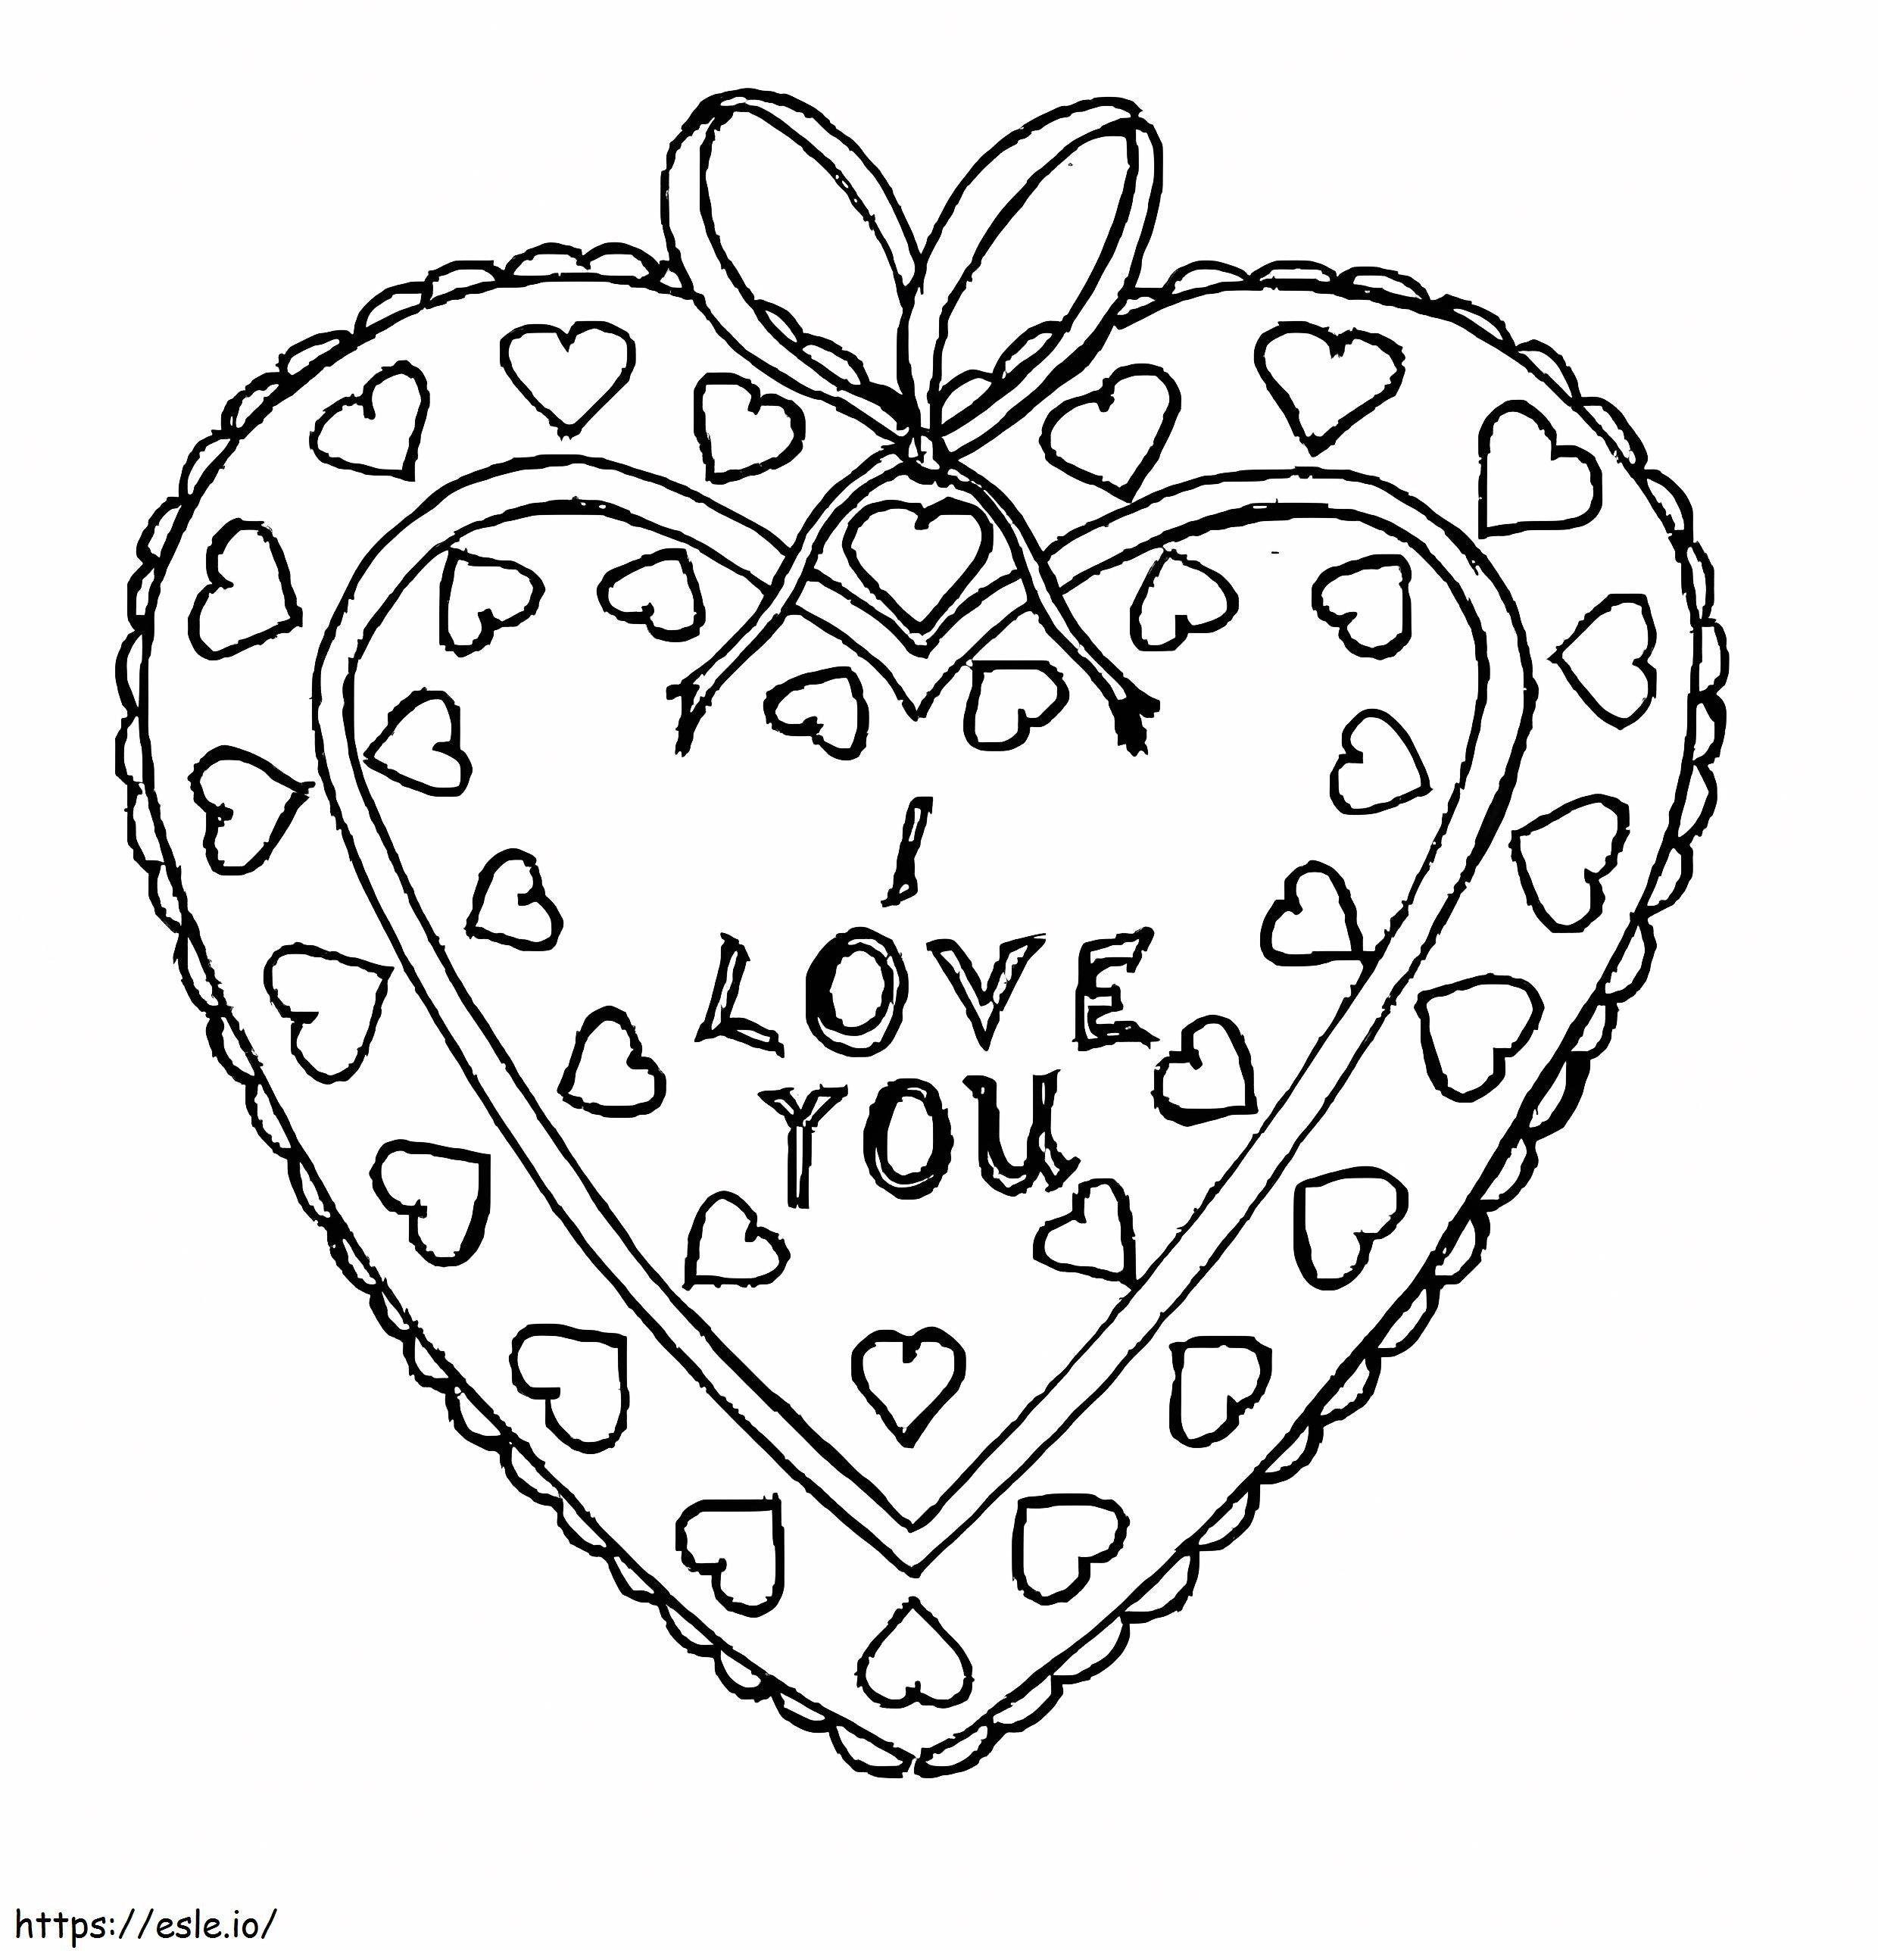 Adorable Valentine Heart coloring page